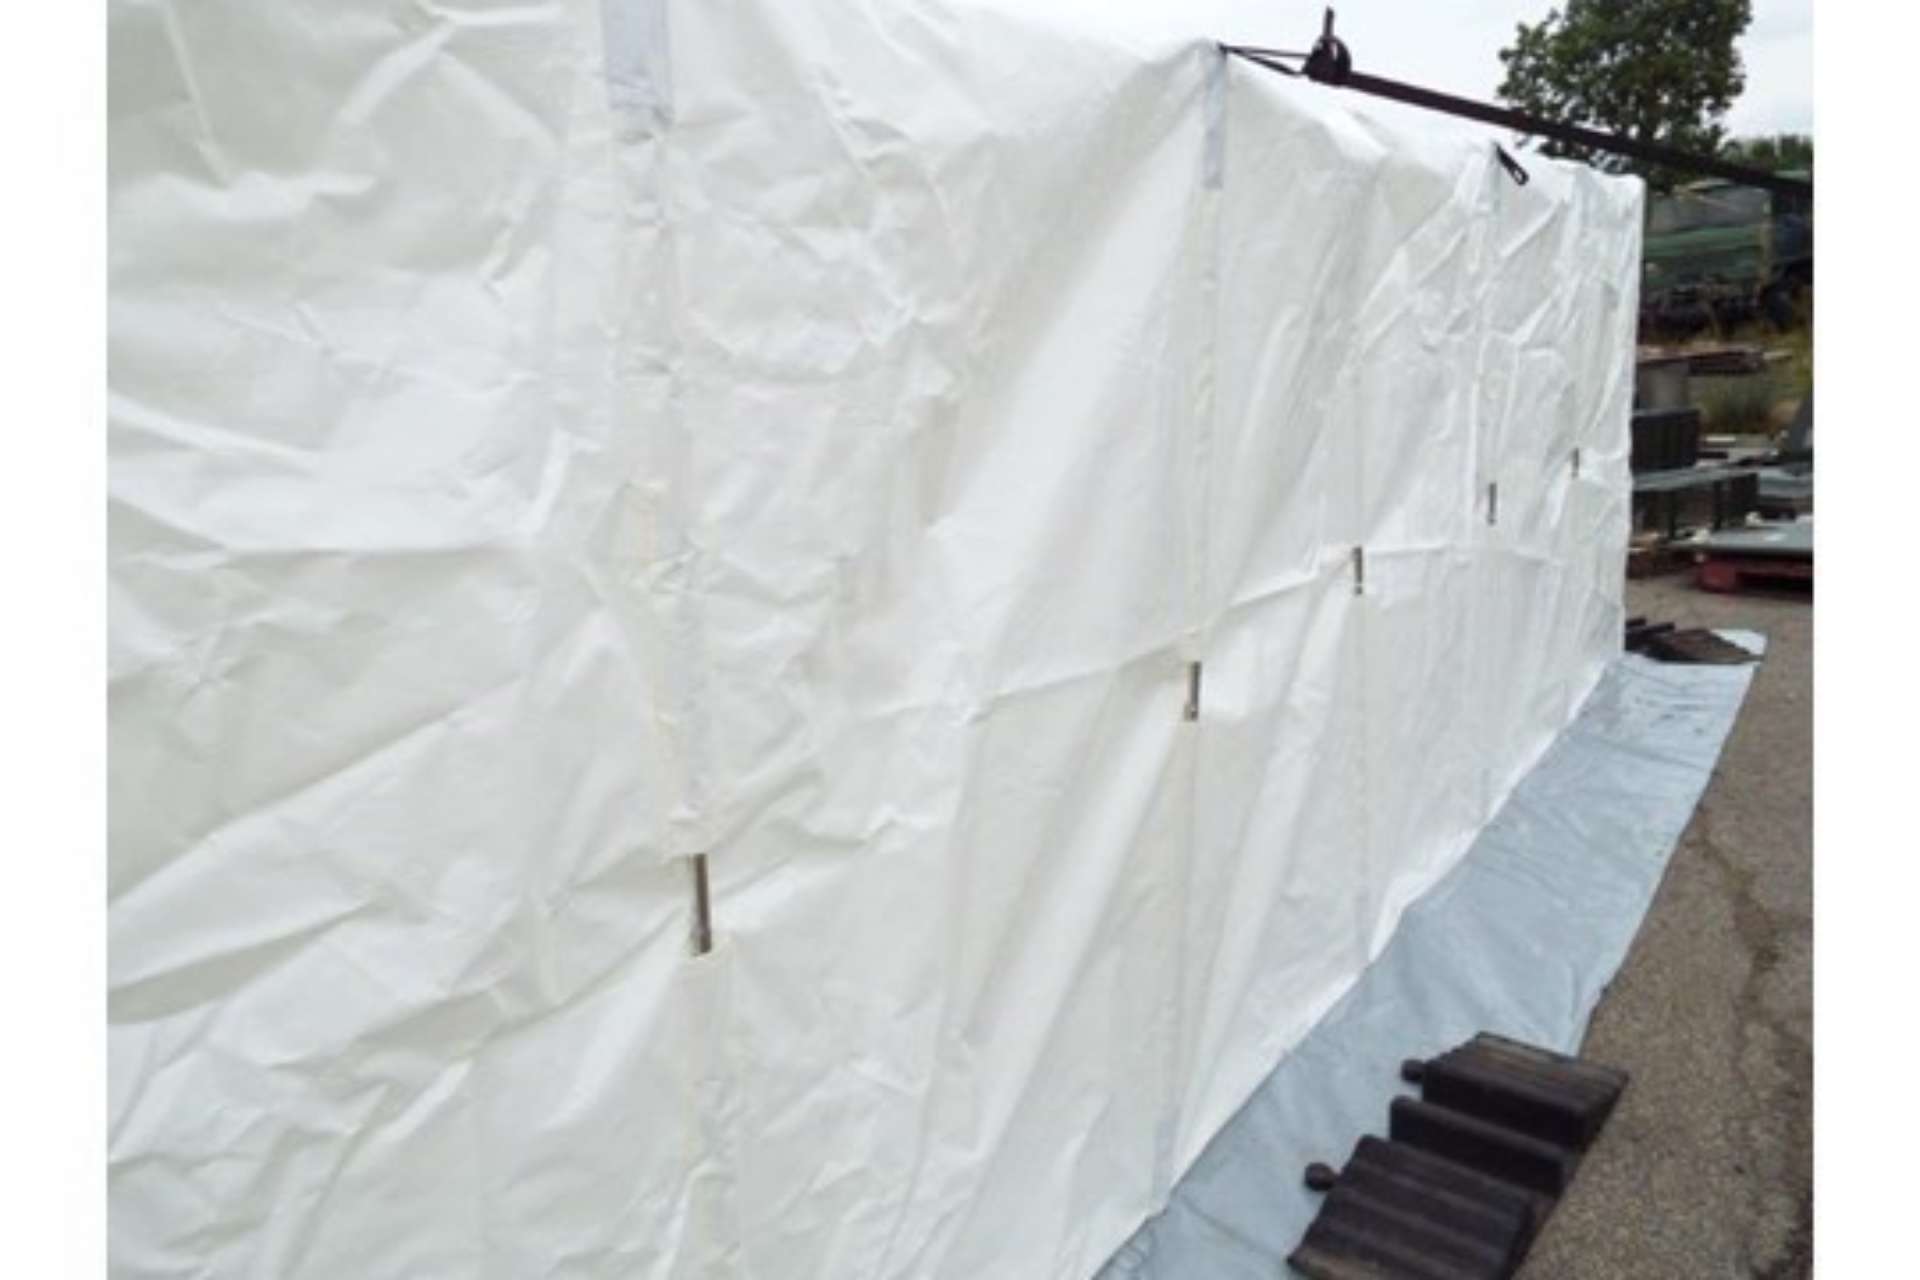 Unissued 8mx4m Inflatable Decontamination/Party Tent - Image 5 of 13